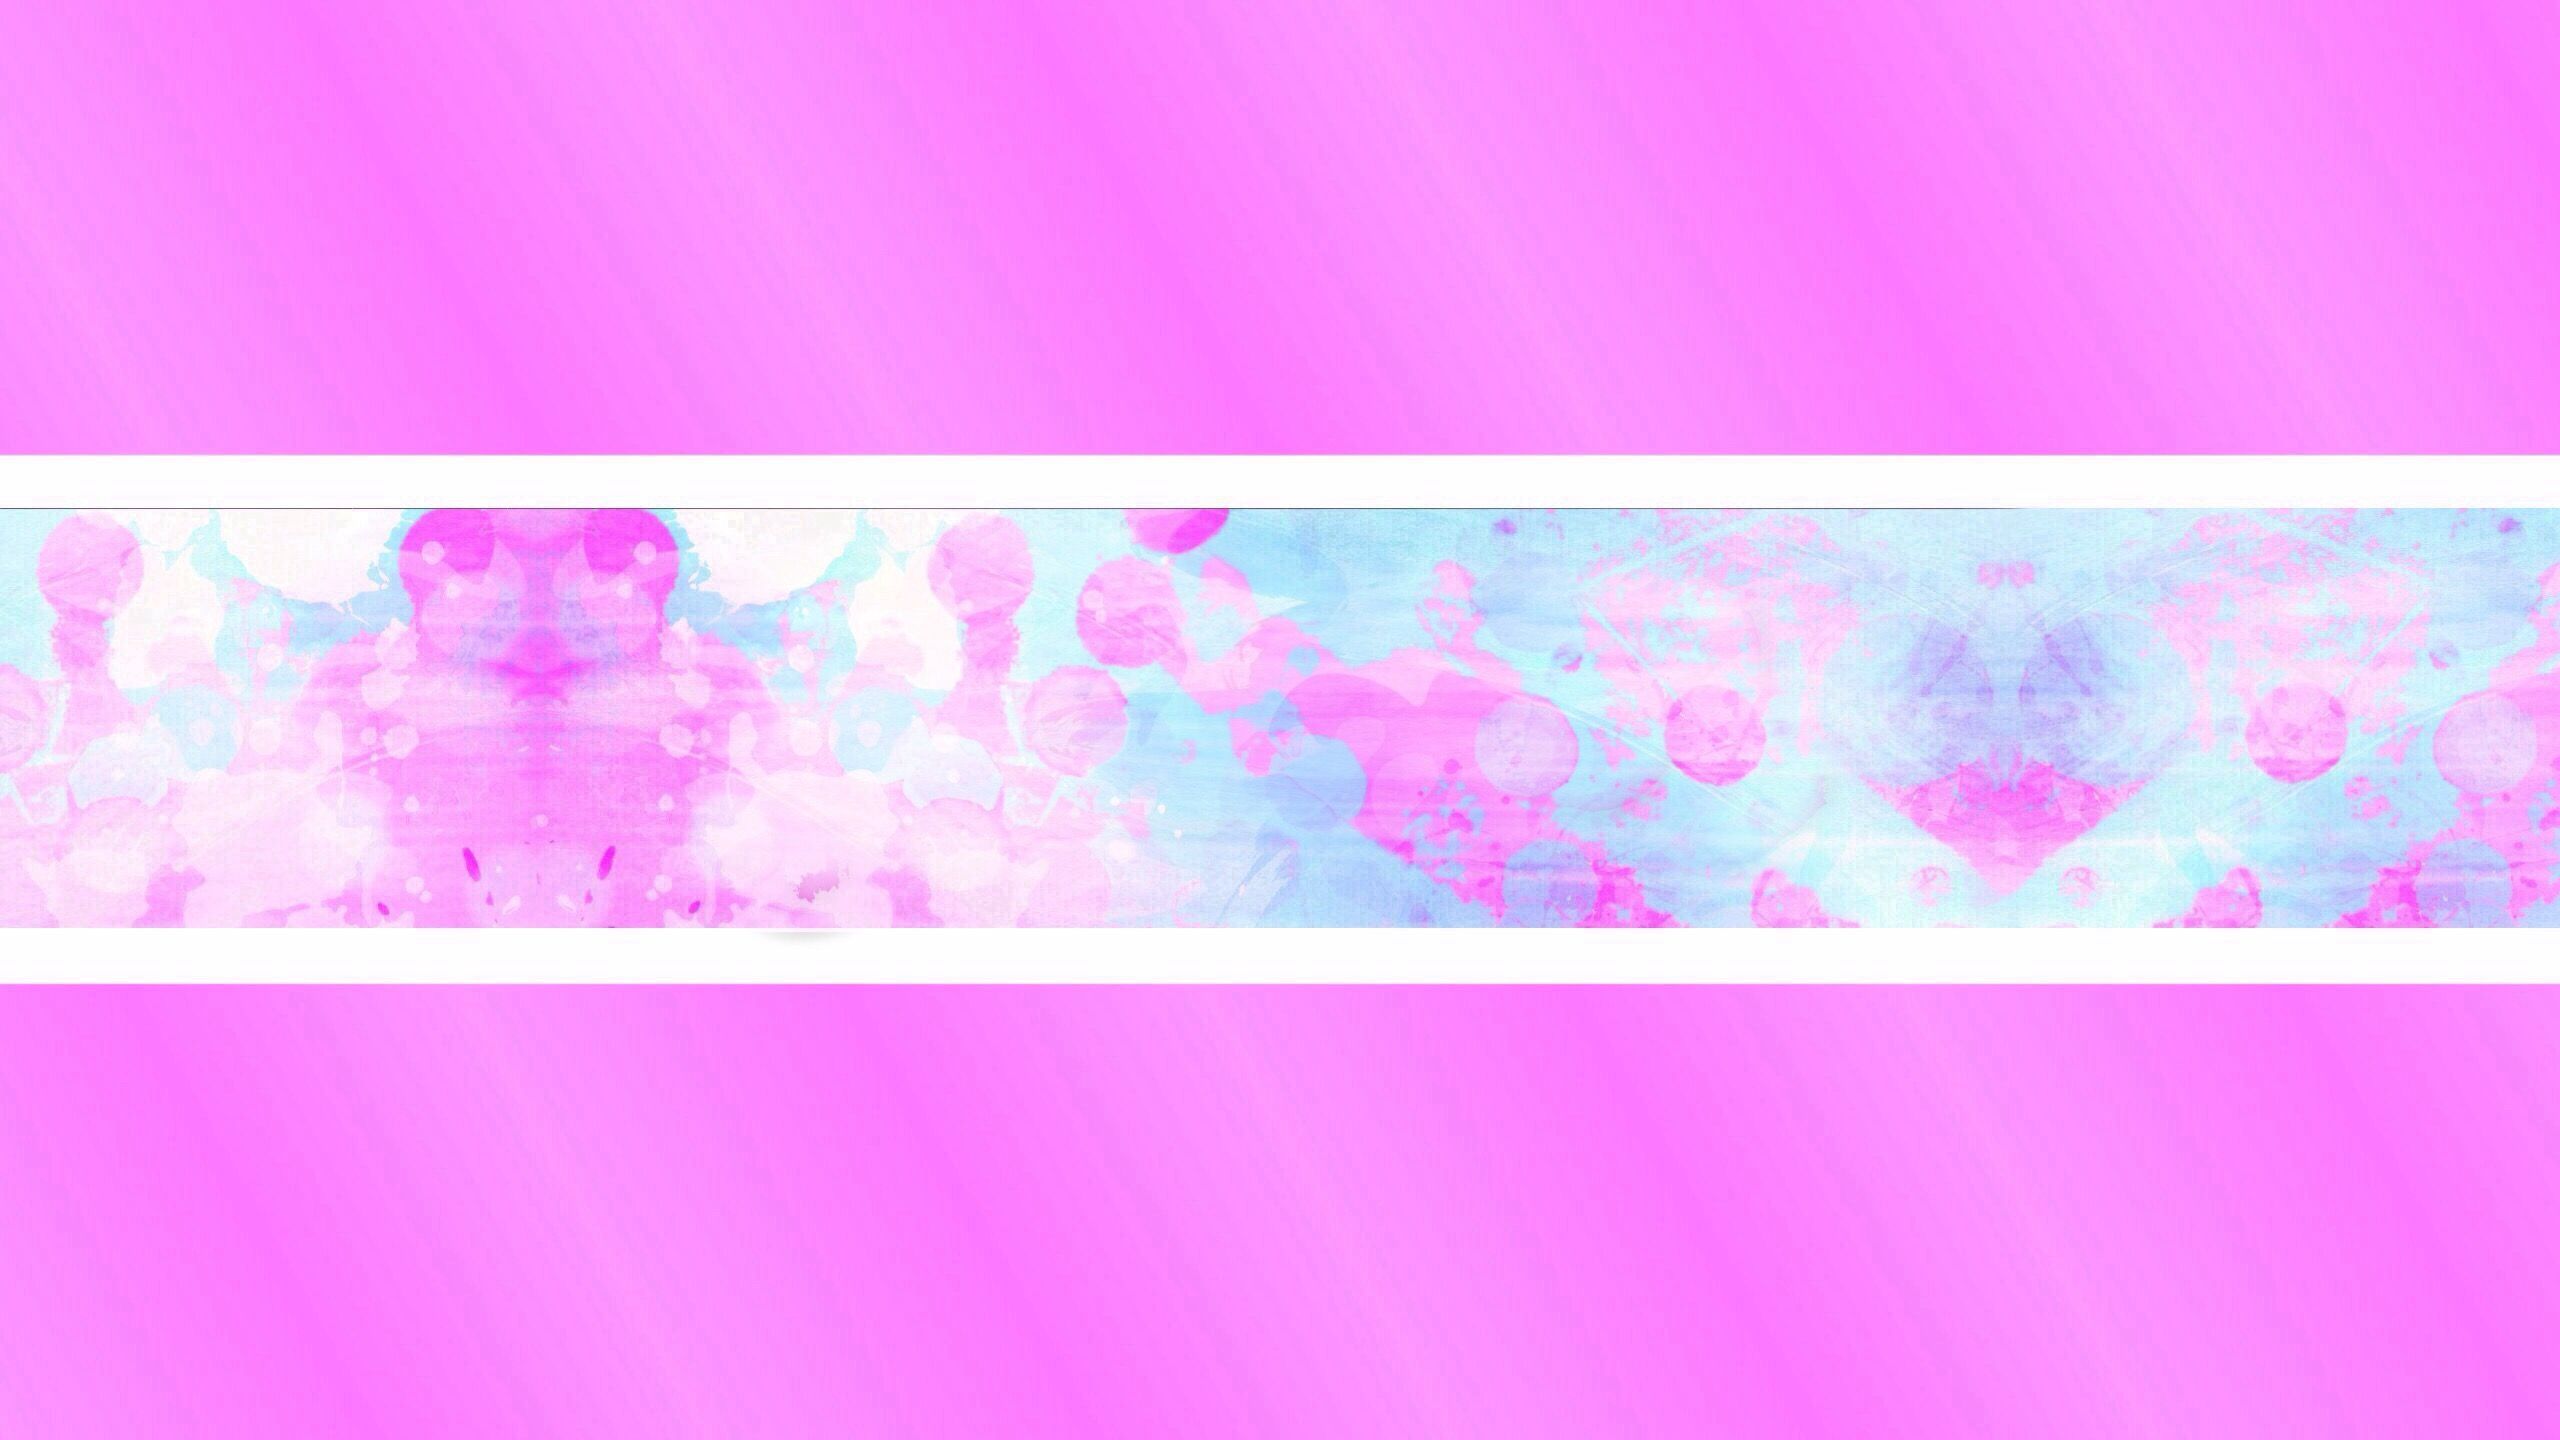 banners for youtube